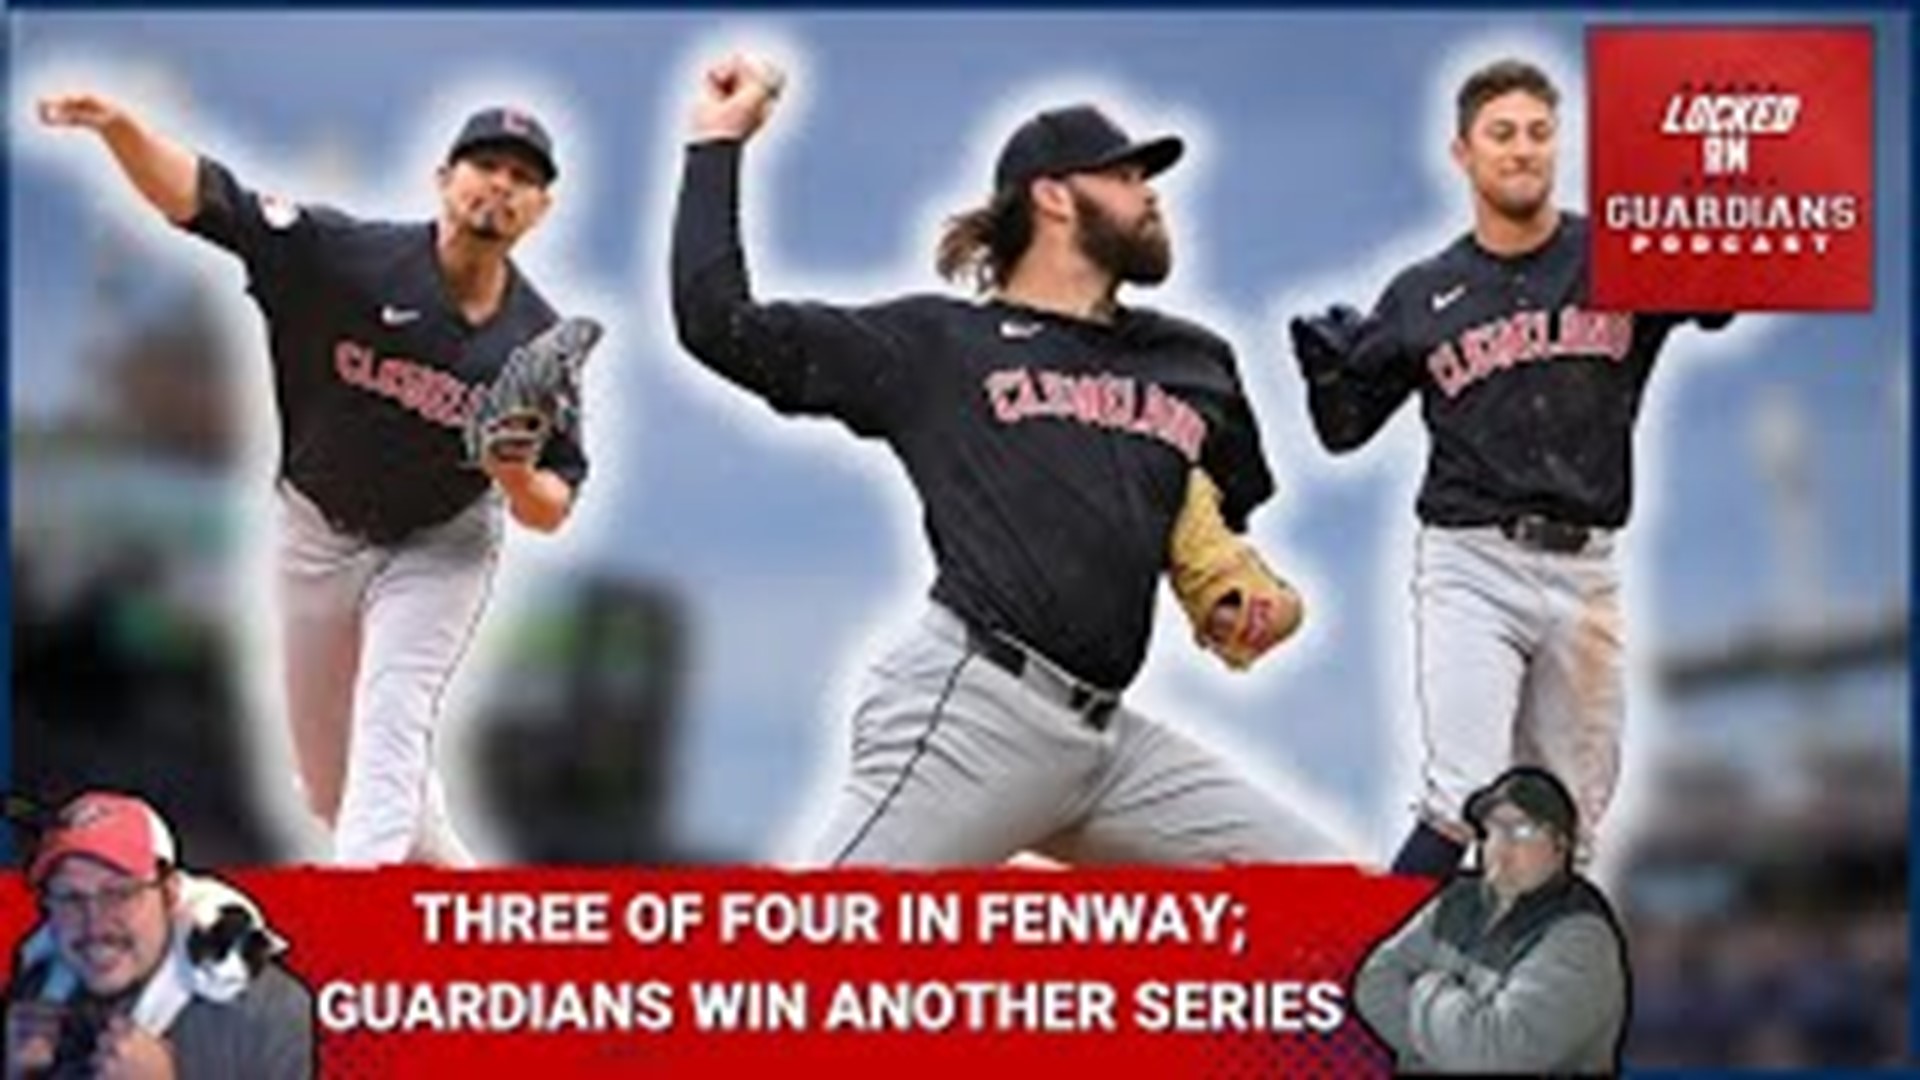 The Guardians continue to be road warriors, winning the series against Boston at Fenway, 5-4 on Thursday.